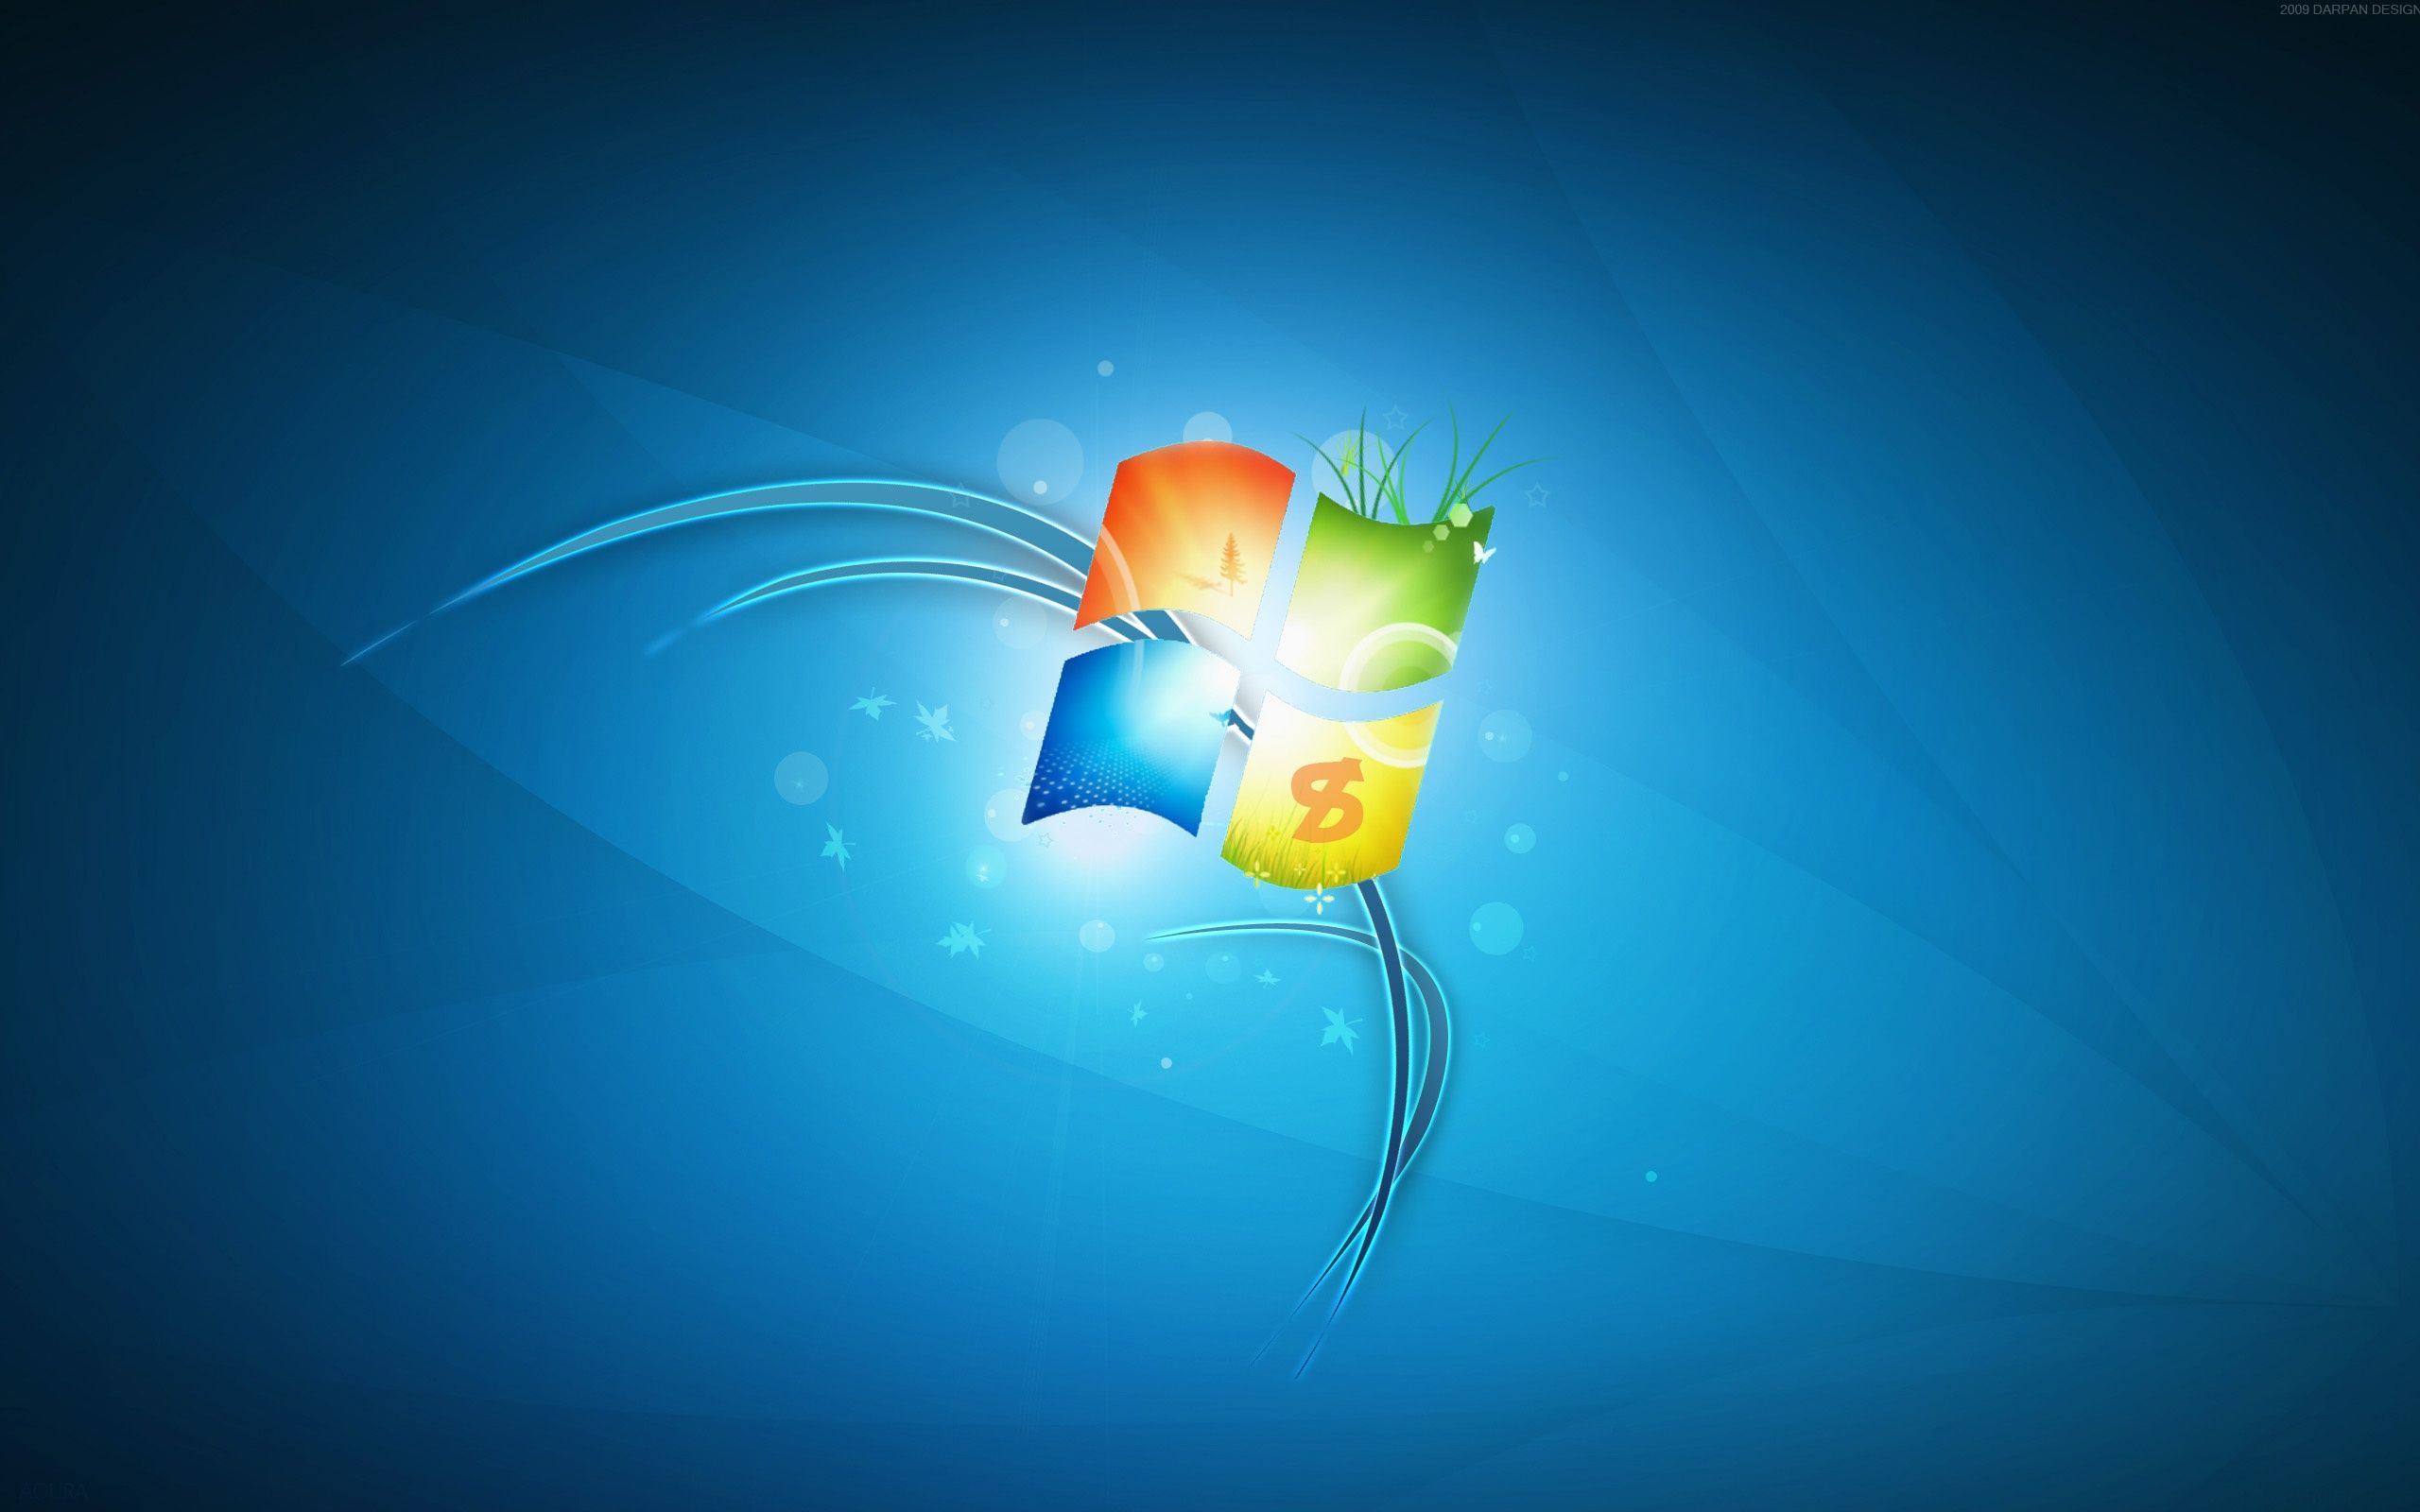 Windows 8 official wallpaper wallpapers and images - wallpapers ...